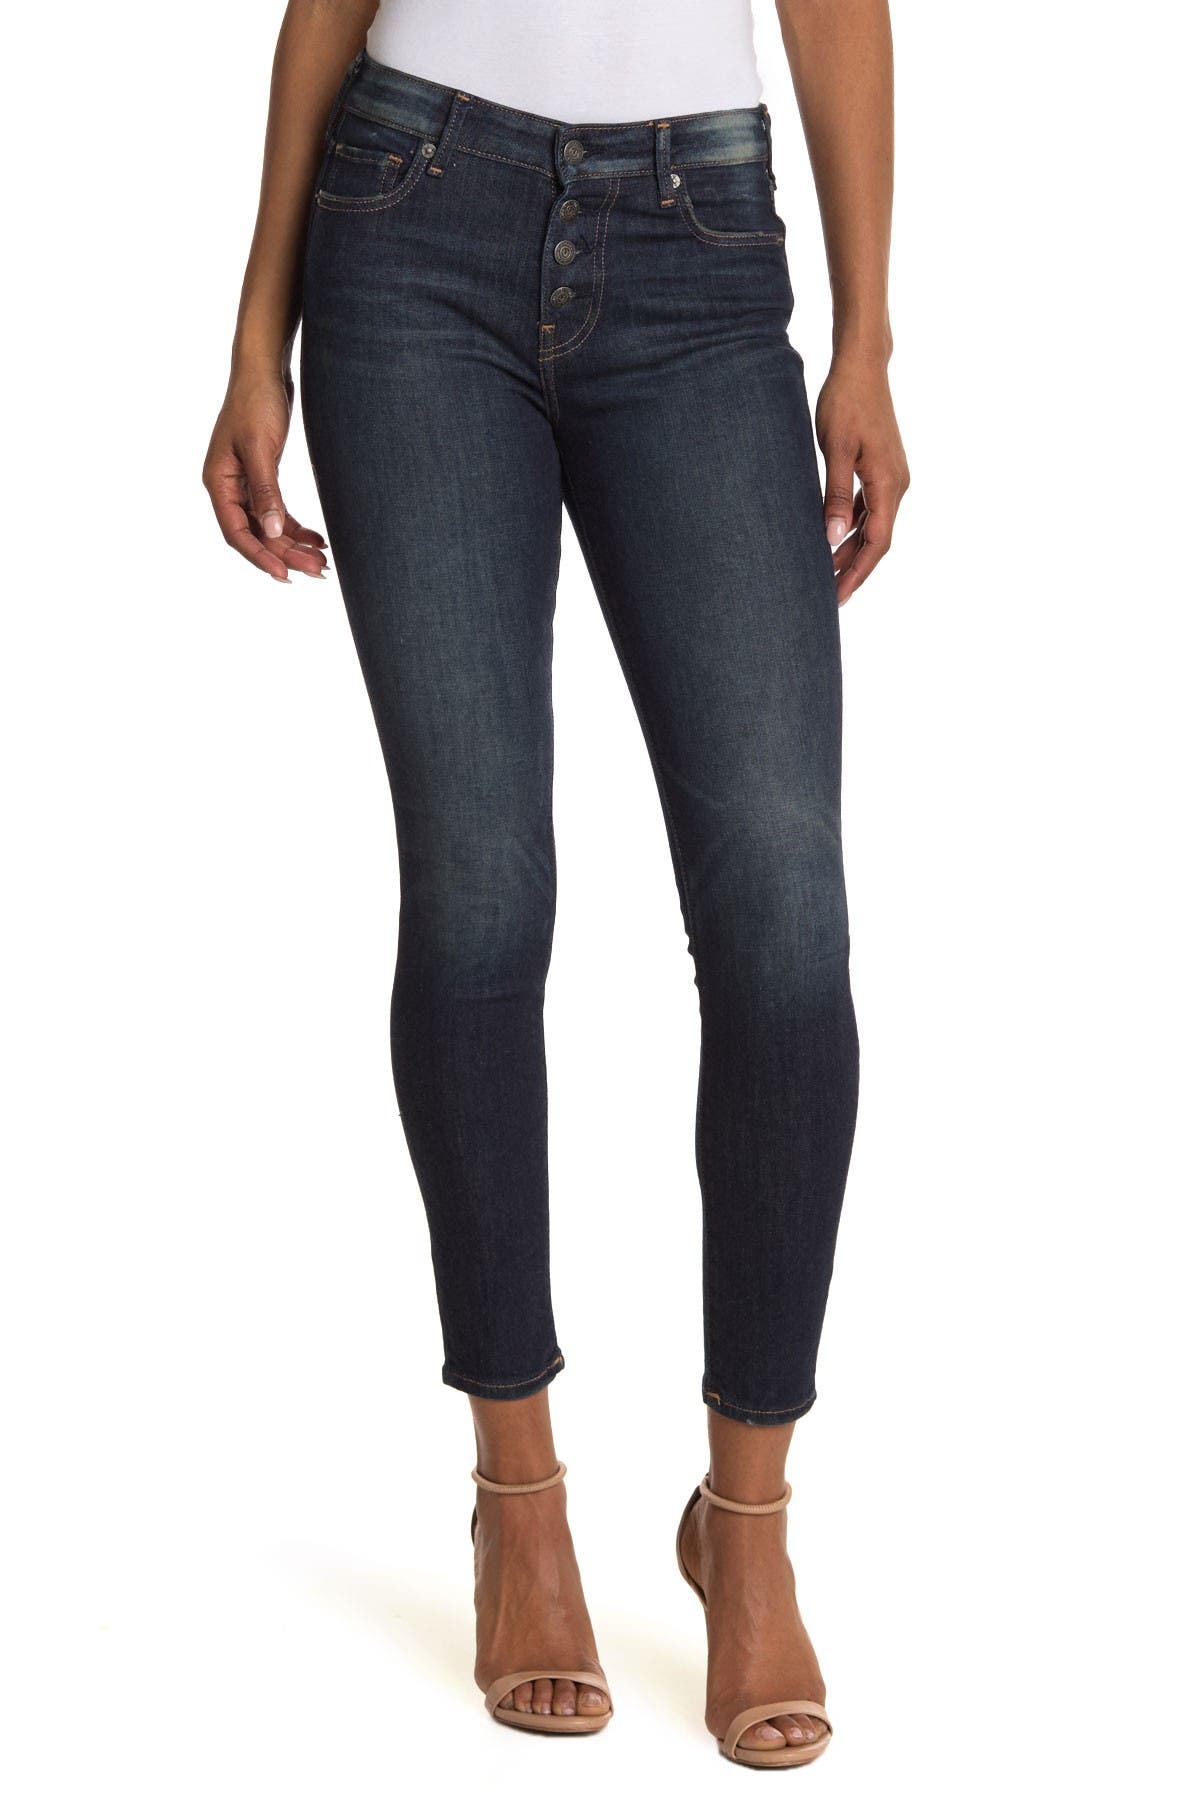 True Religion | Halle Button Fly Skinny 